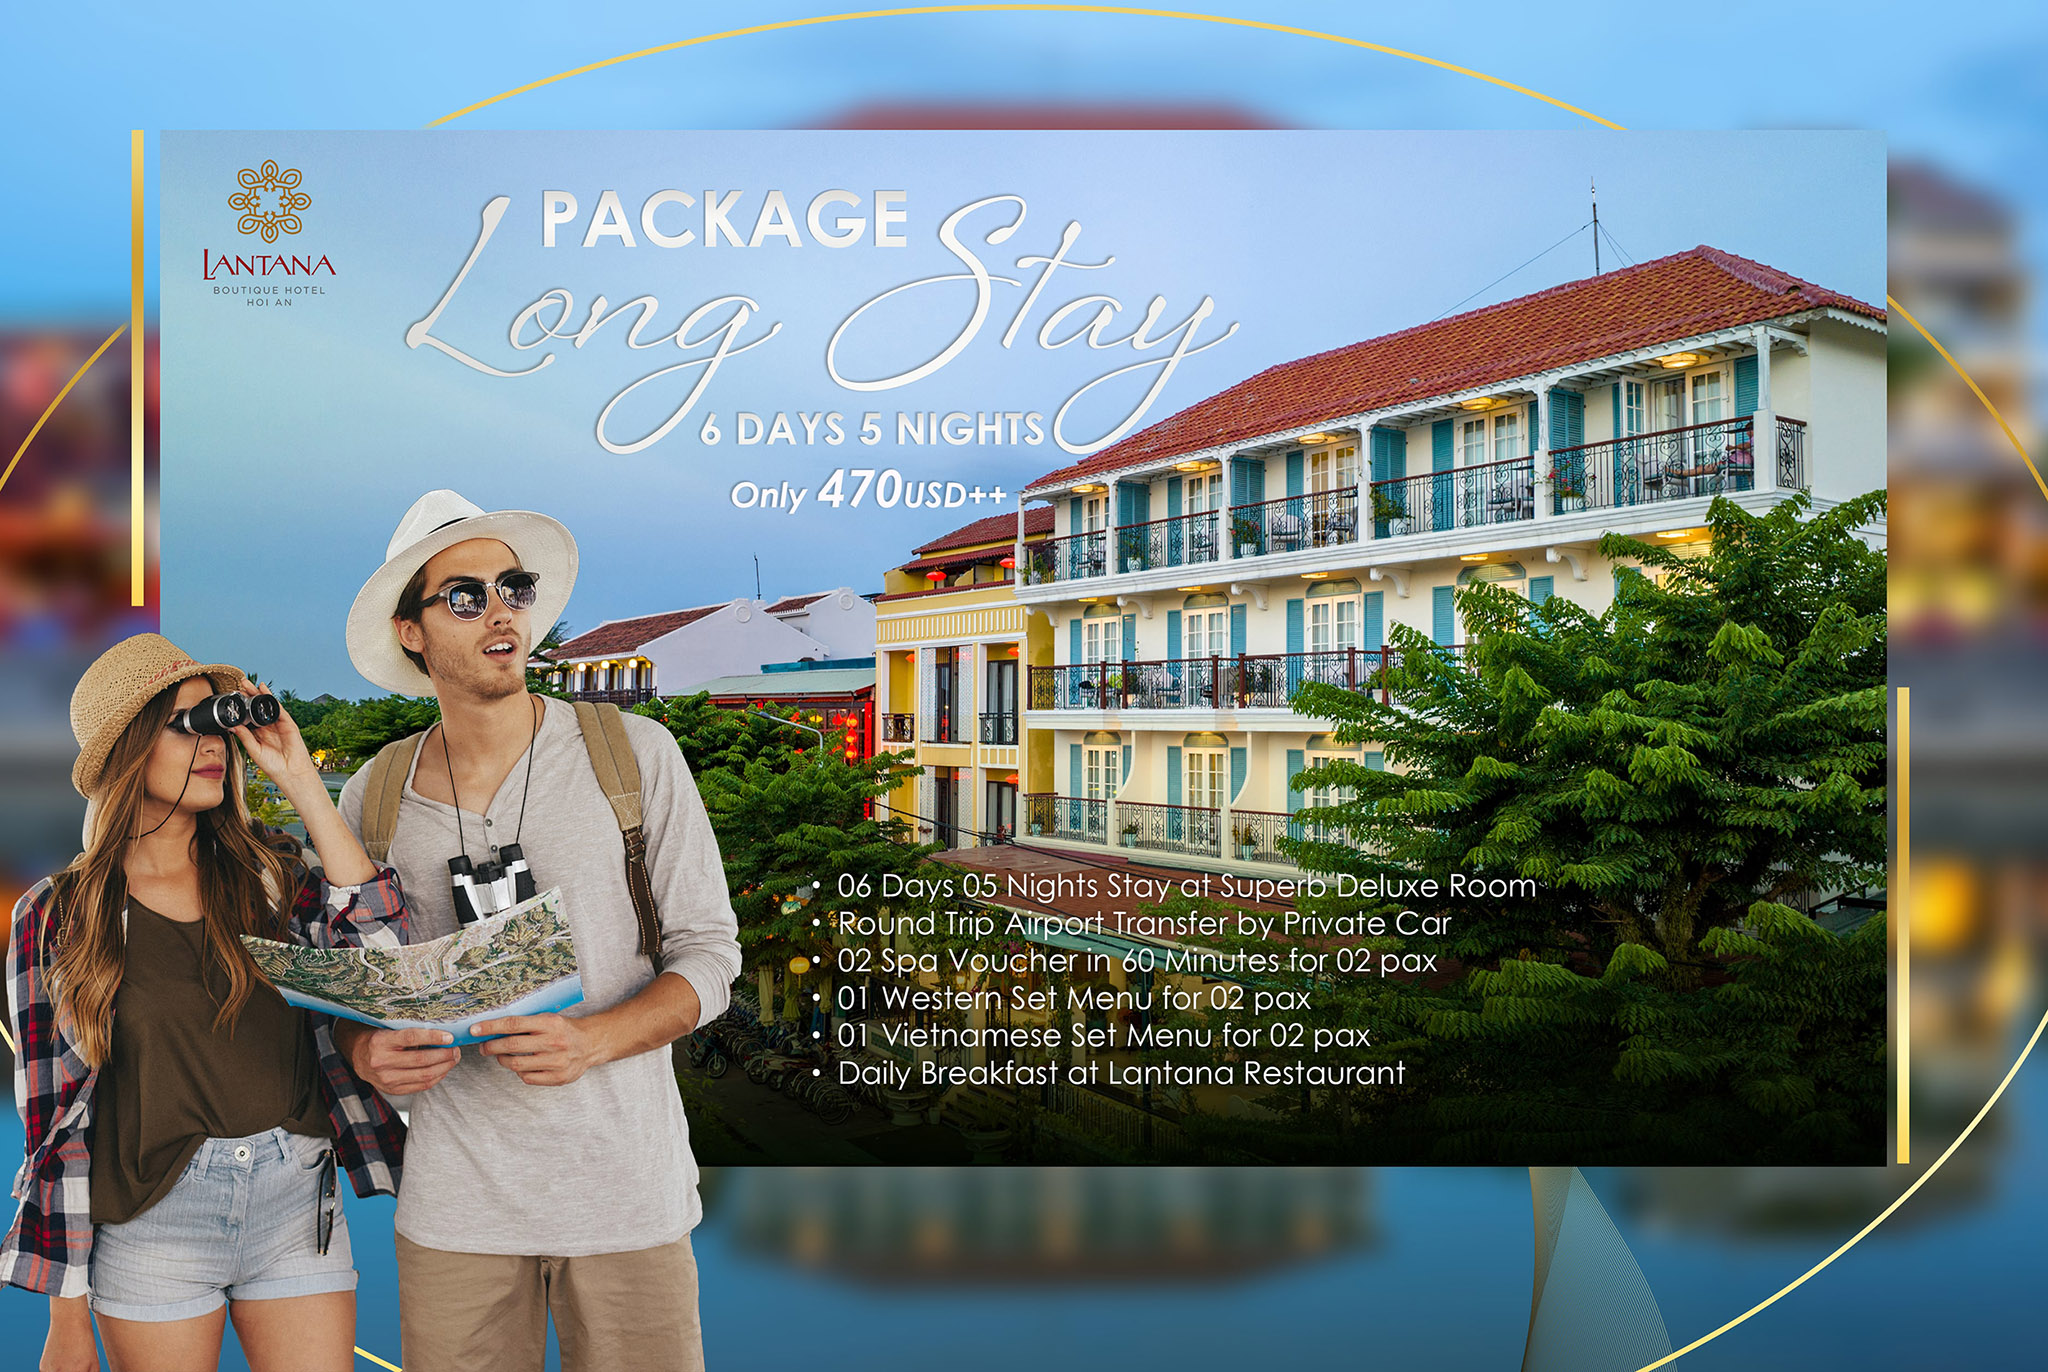 LONG STAY PACKAGE - 6 Days 5 Nights Only 470 USD++